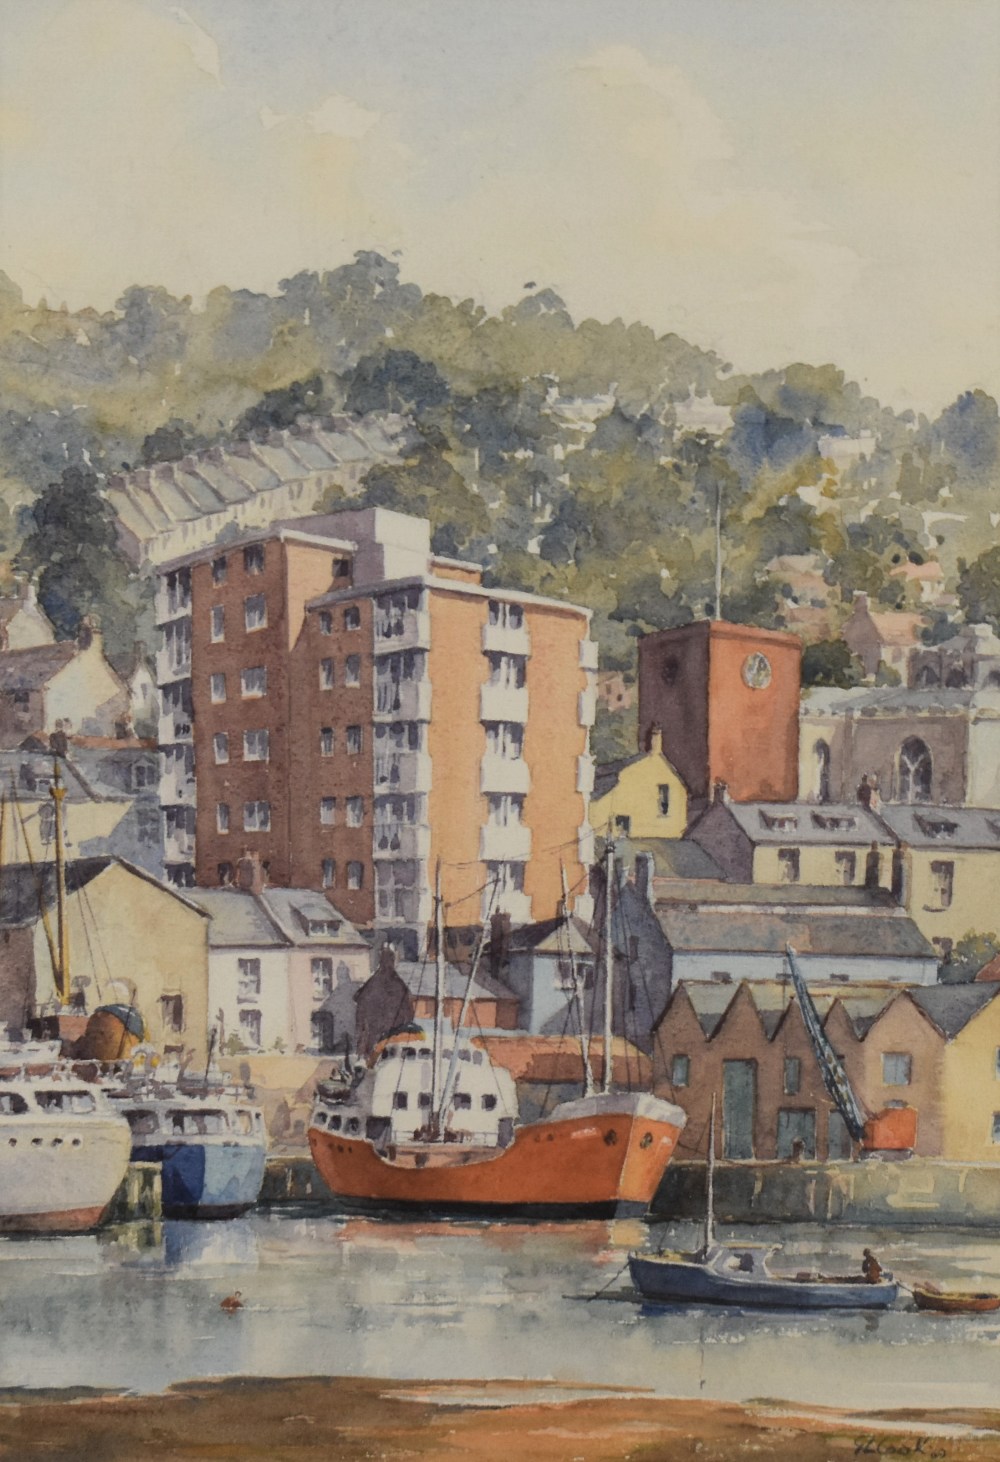 G.L Cook (British 20th century) watercolours, a nicely composed harbour scene with buildings